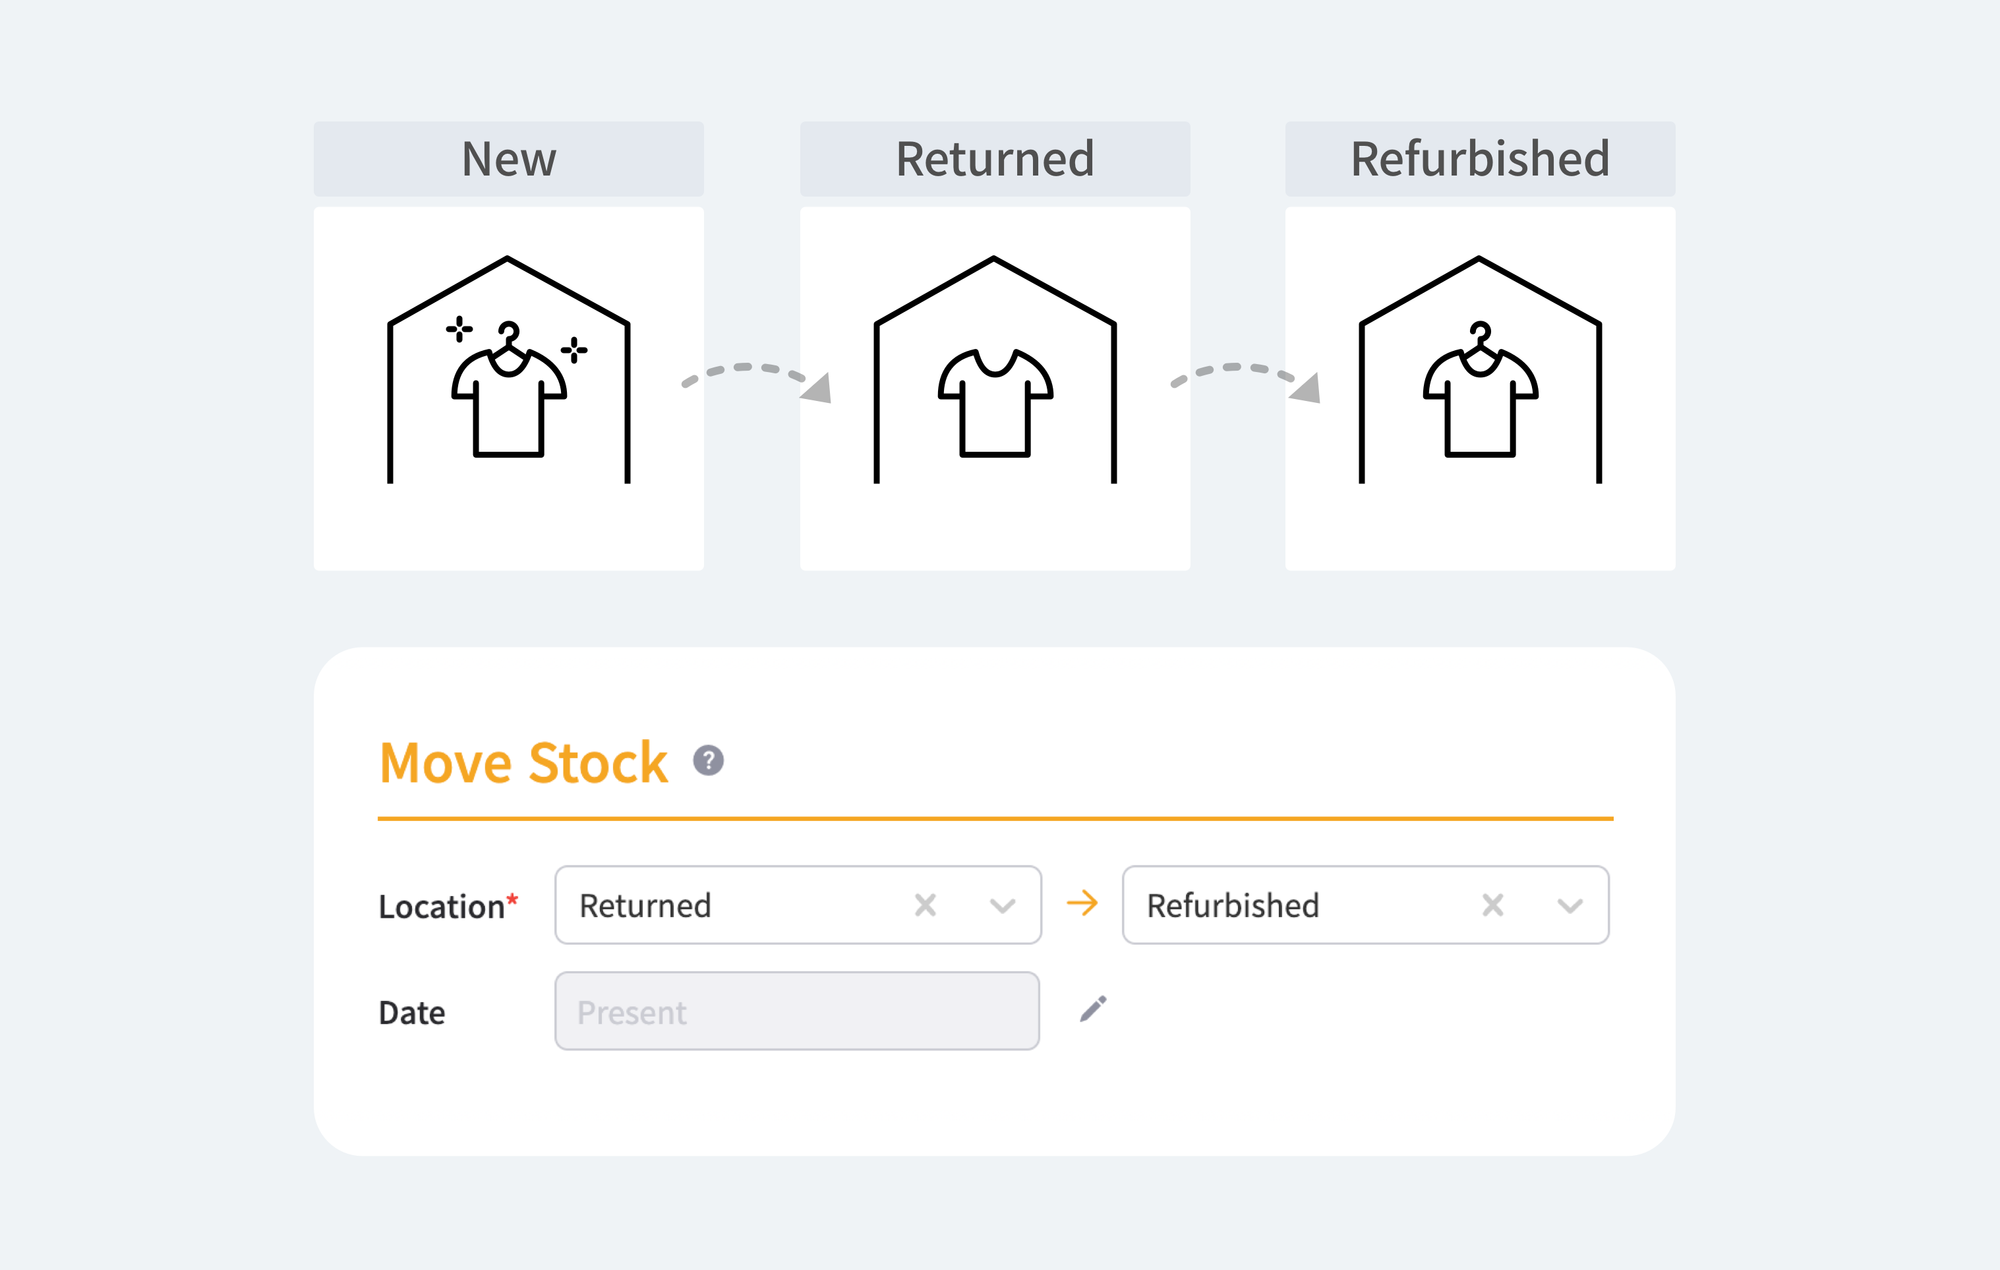 An infographic showing how to use the Location Mode on the BoxHero app based on the conditions (new, returned, and refurbished) of stocks